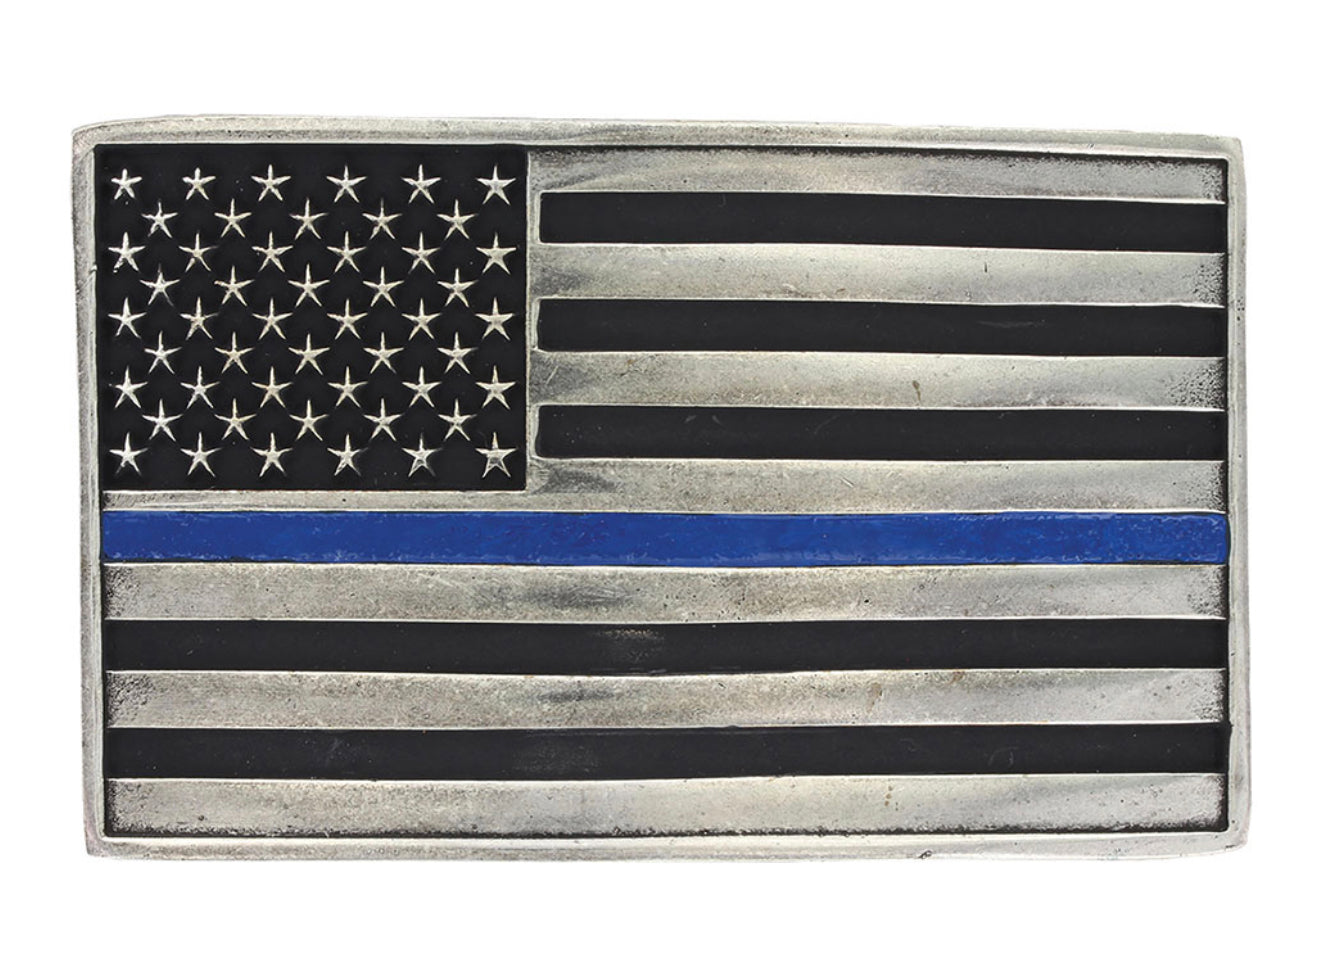 Stand Behind the Blue Line Belt Buckle